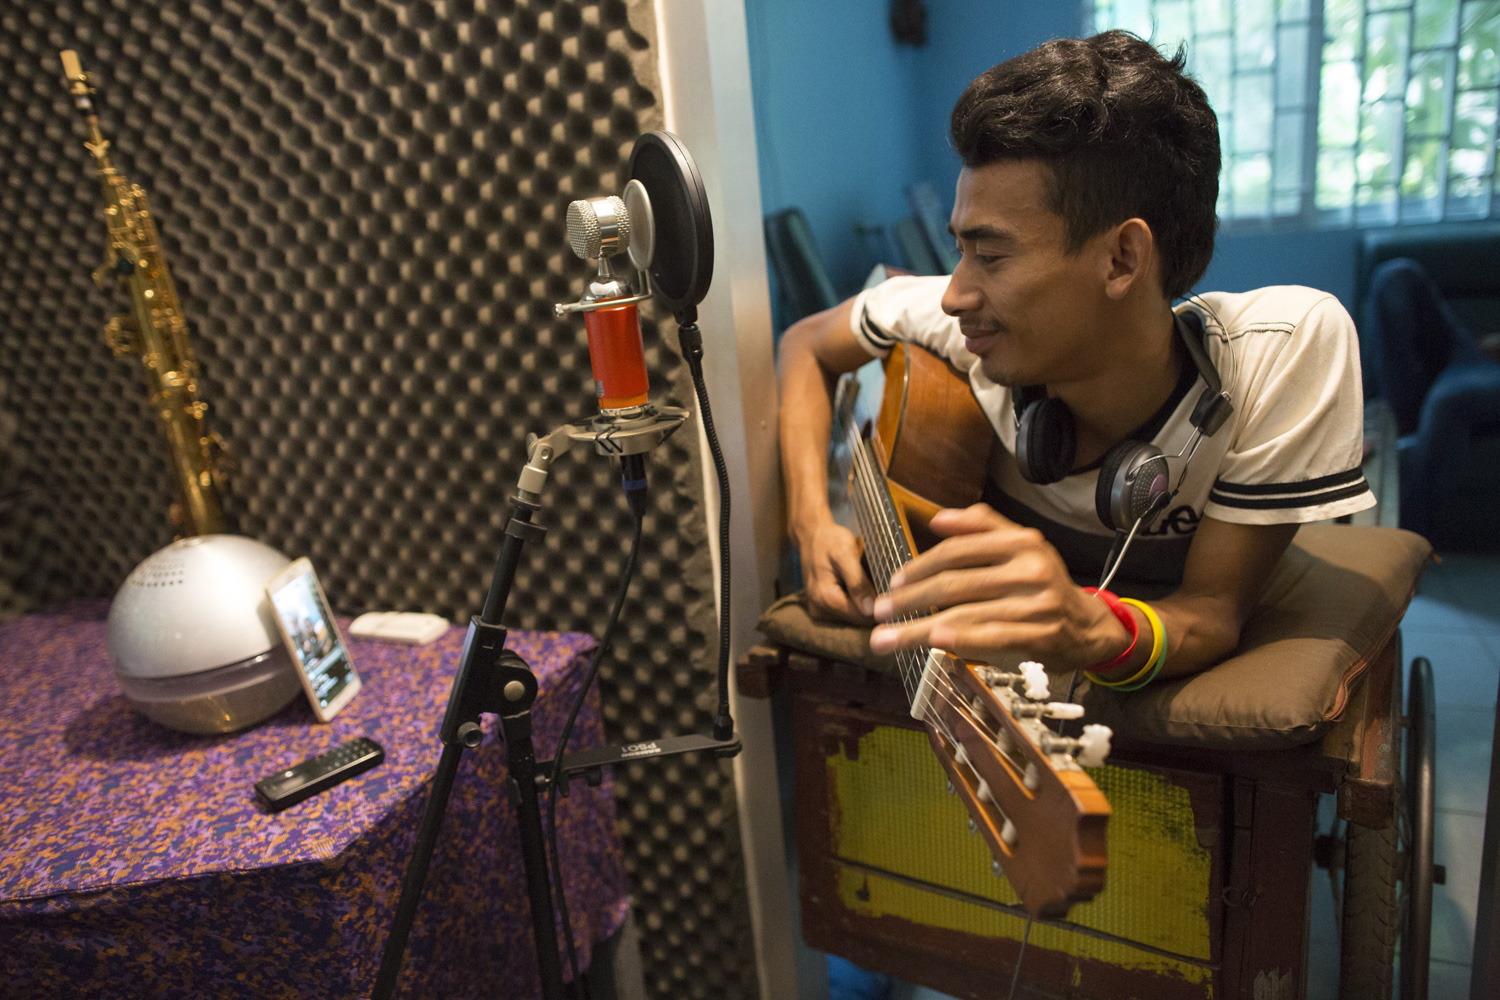 Sophanna recording an original song at a friend’s studio. He has over 45,800 followers on his Facebook page, PhannaUseal, where he posts regular updates on his music.